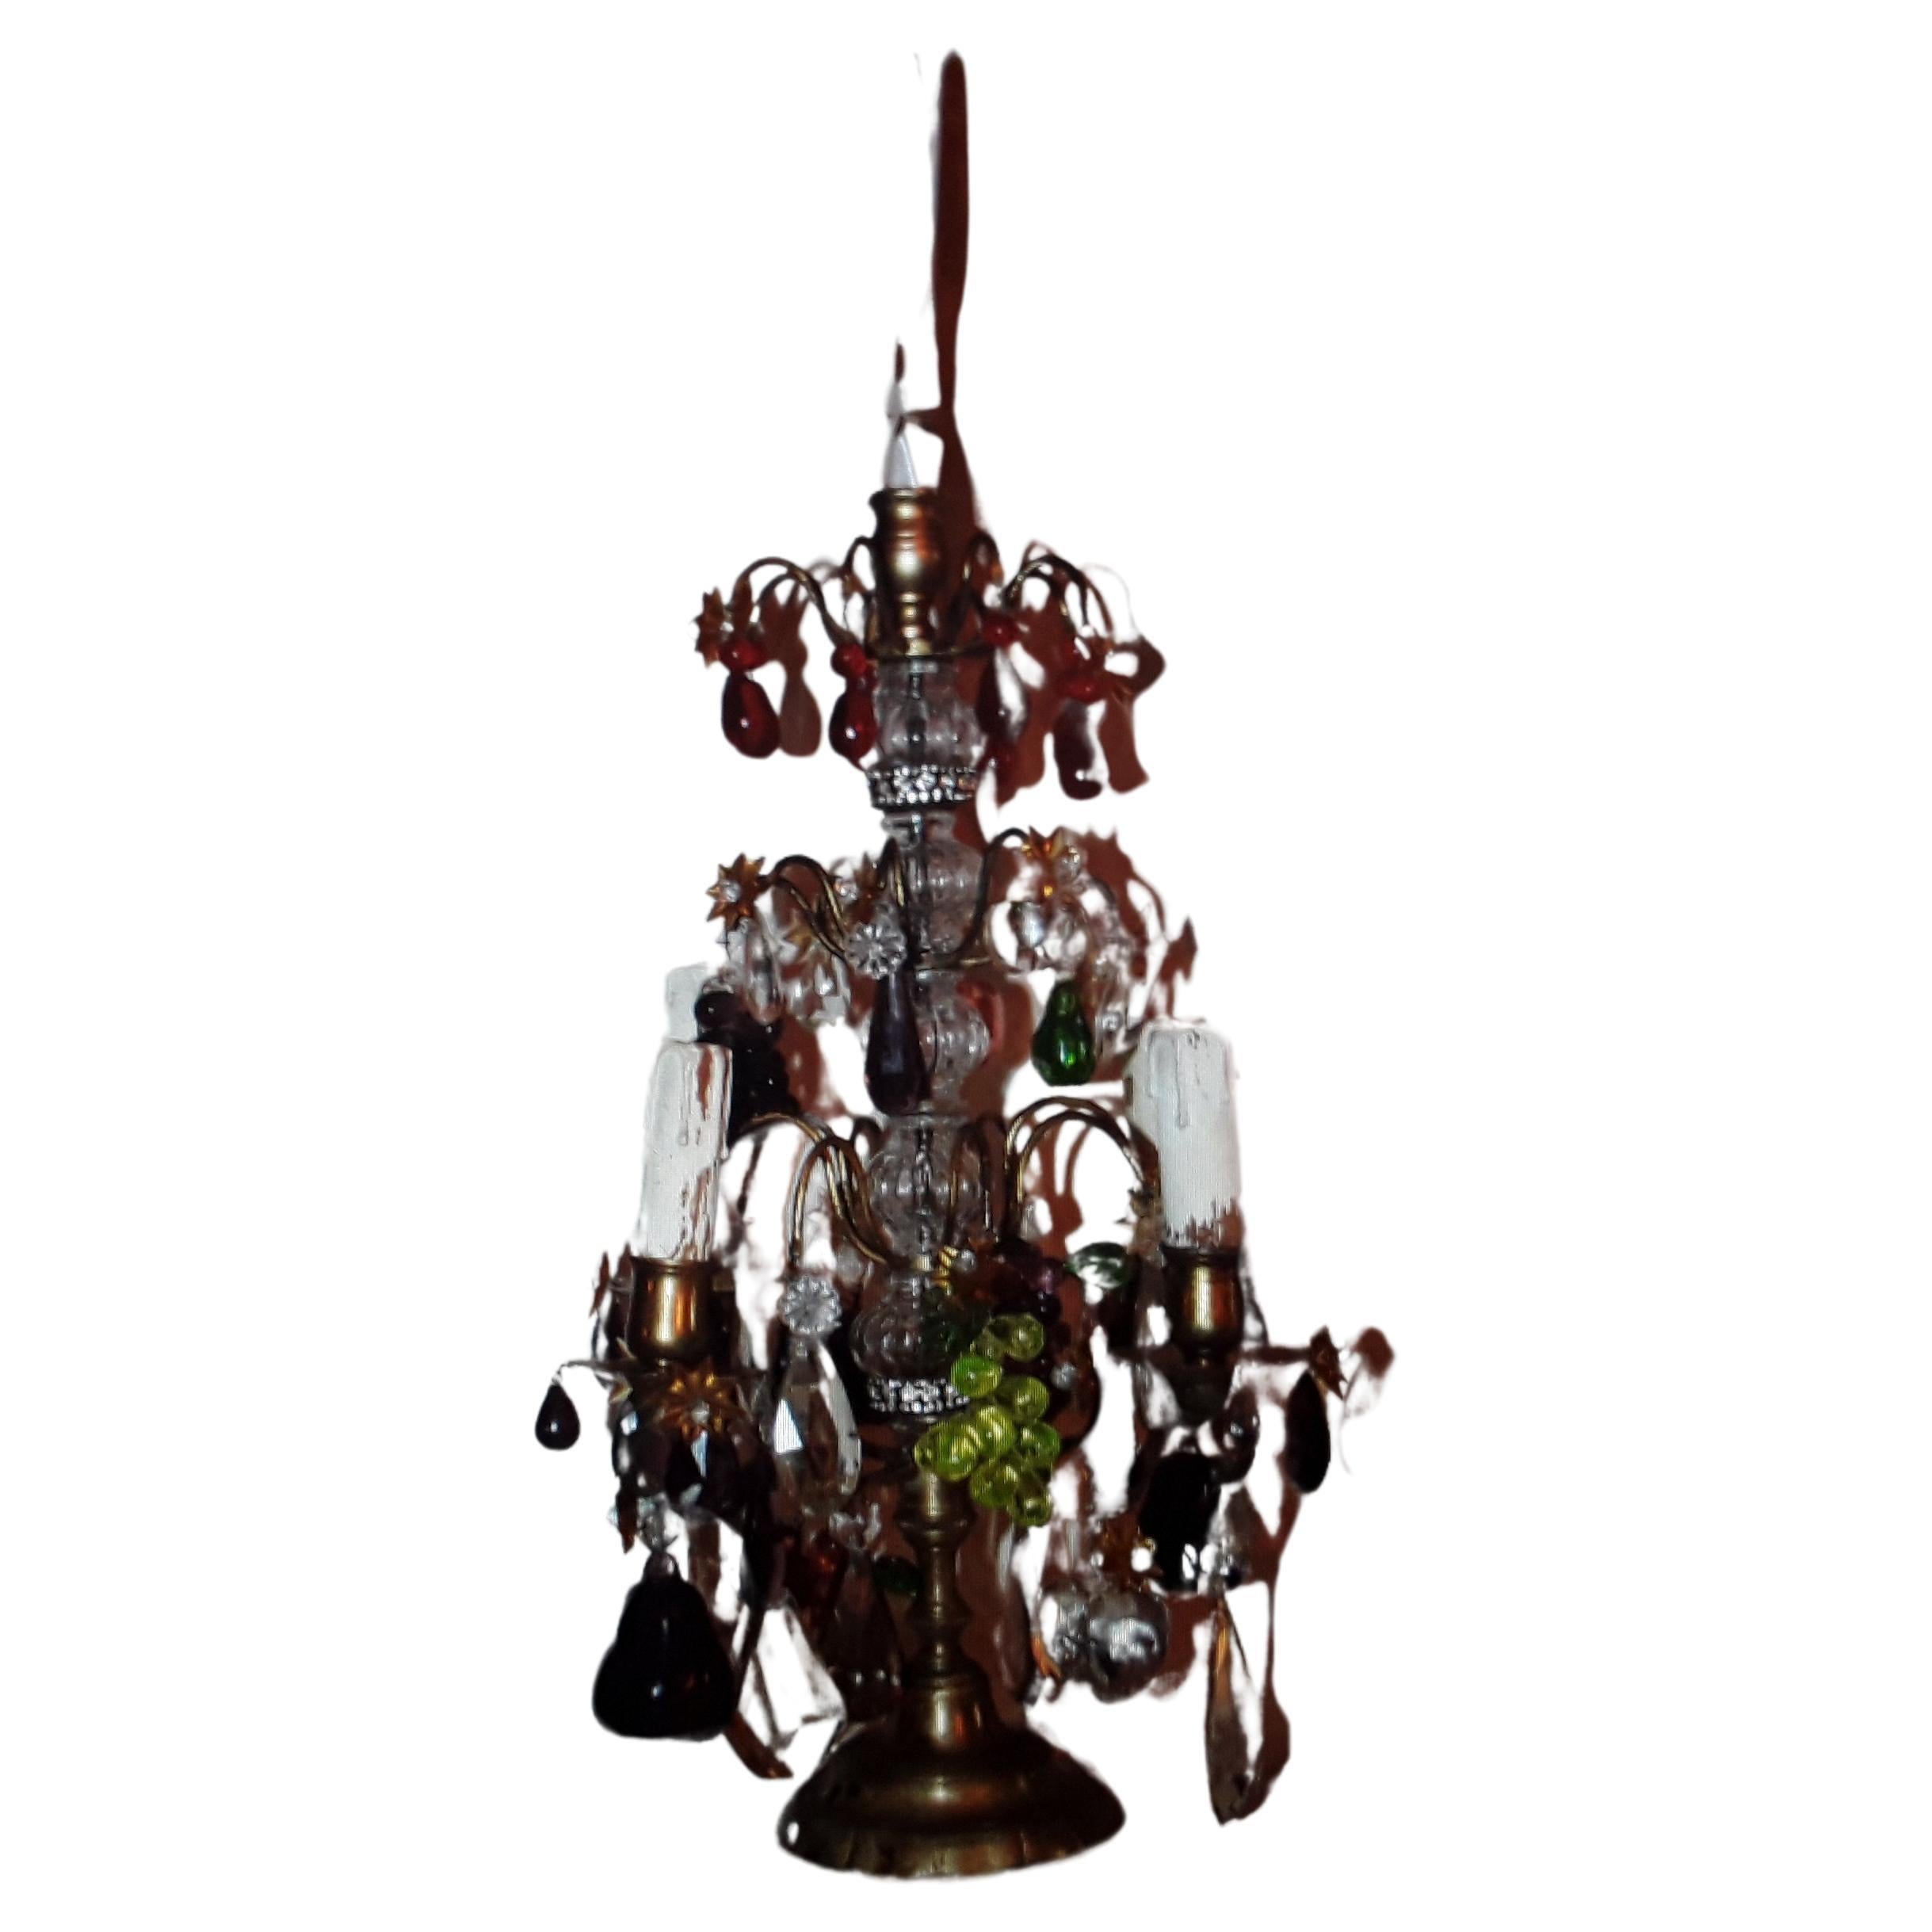 c1880 Antique French Crystal Fruit on Bronze Table Lamp/ Girandoles. This is a stunning lamp now electrified. Miami Beach estate.